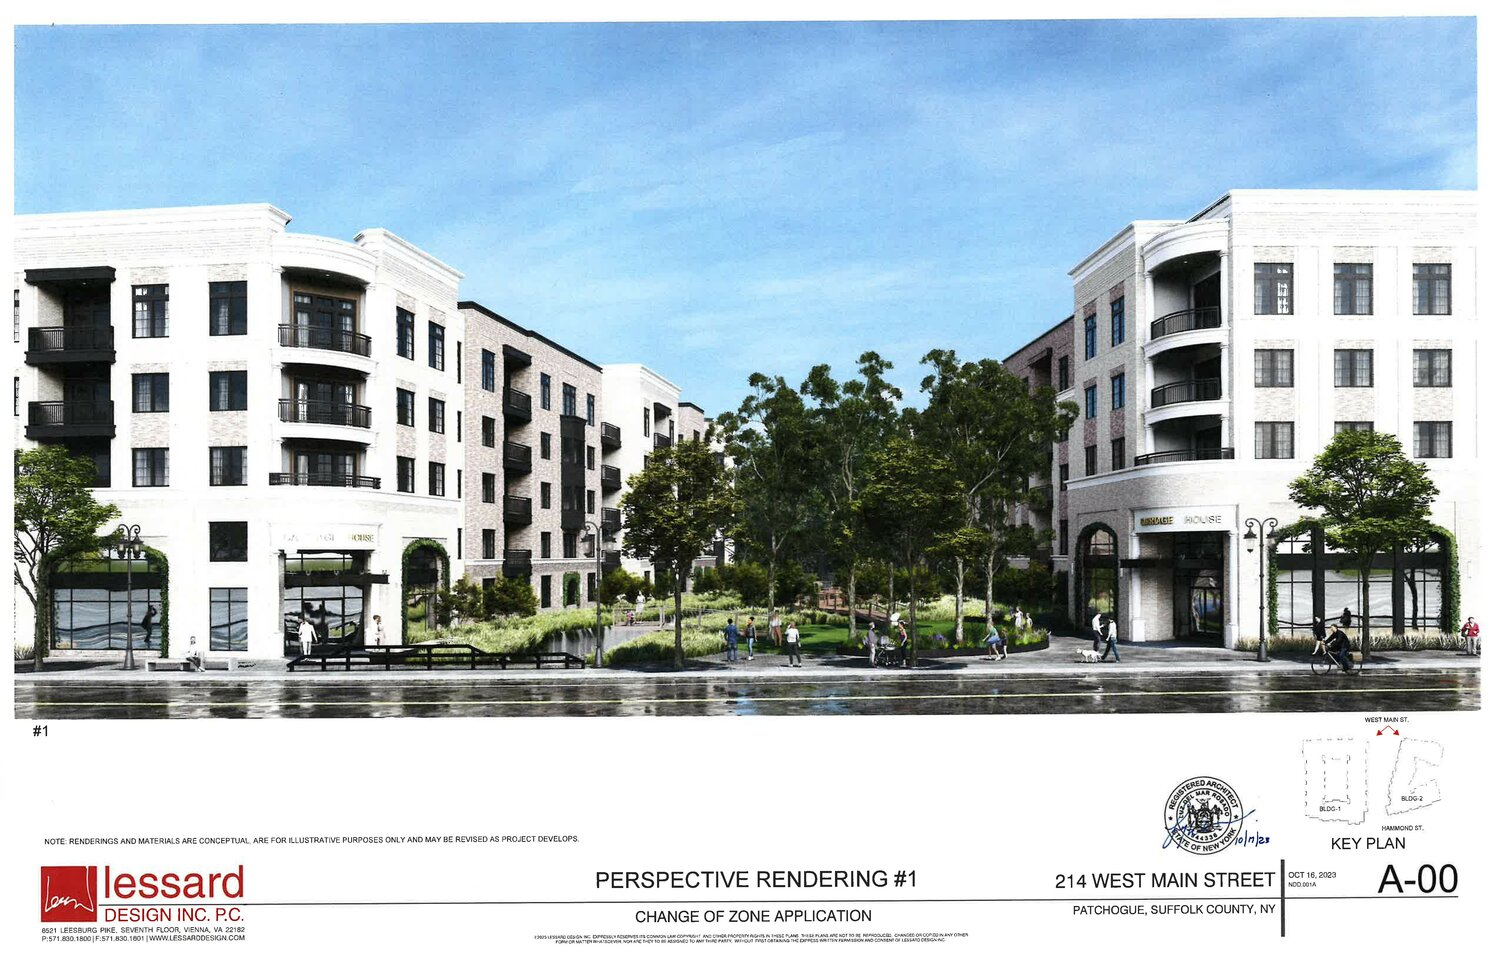 This rendering shows one of the two proposed apartment buildings. The right side of the building would include the former trolley house that would be made part of the building.